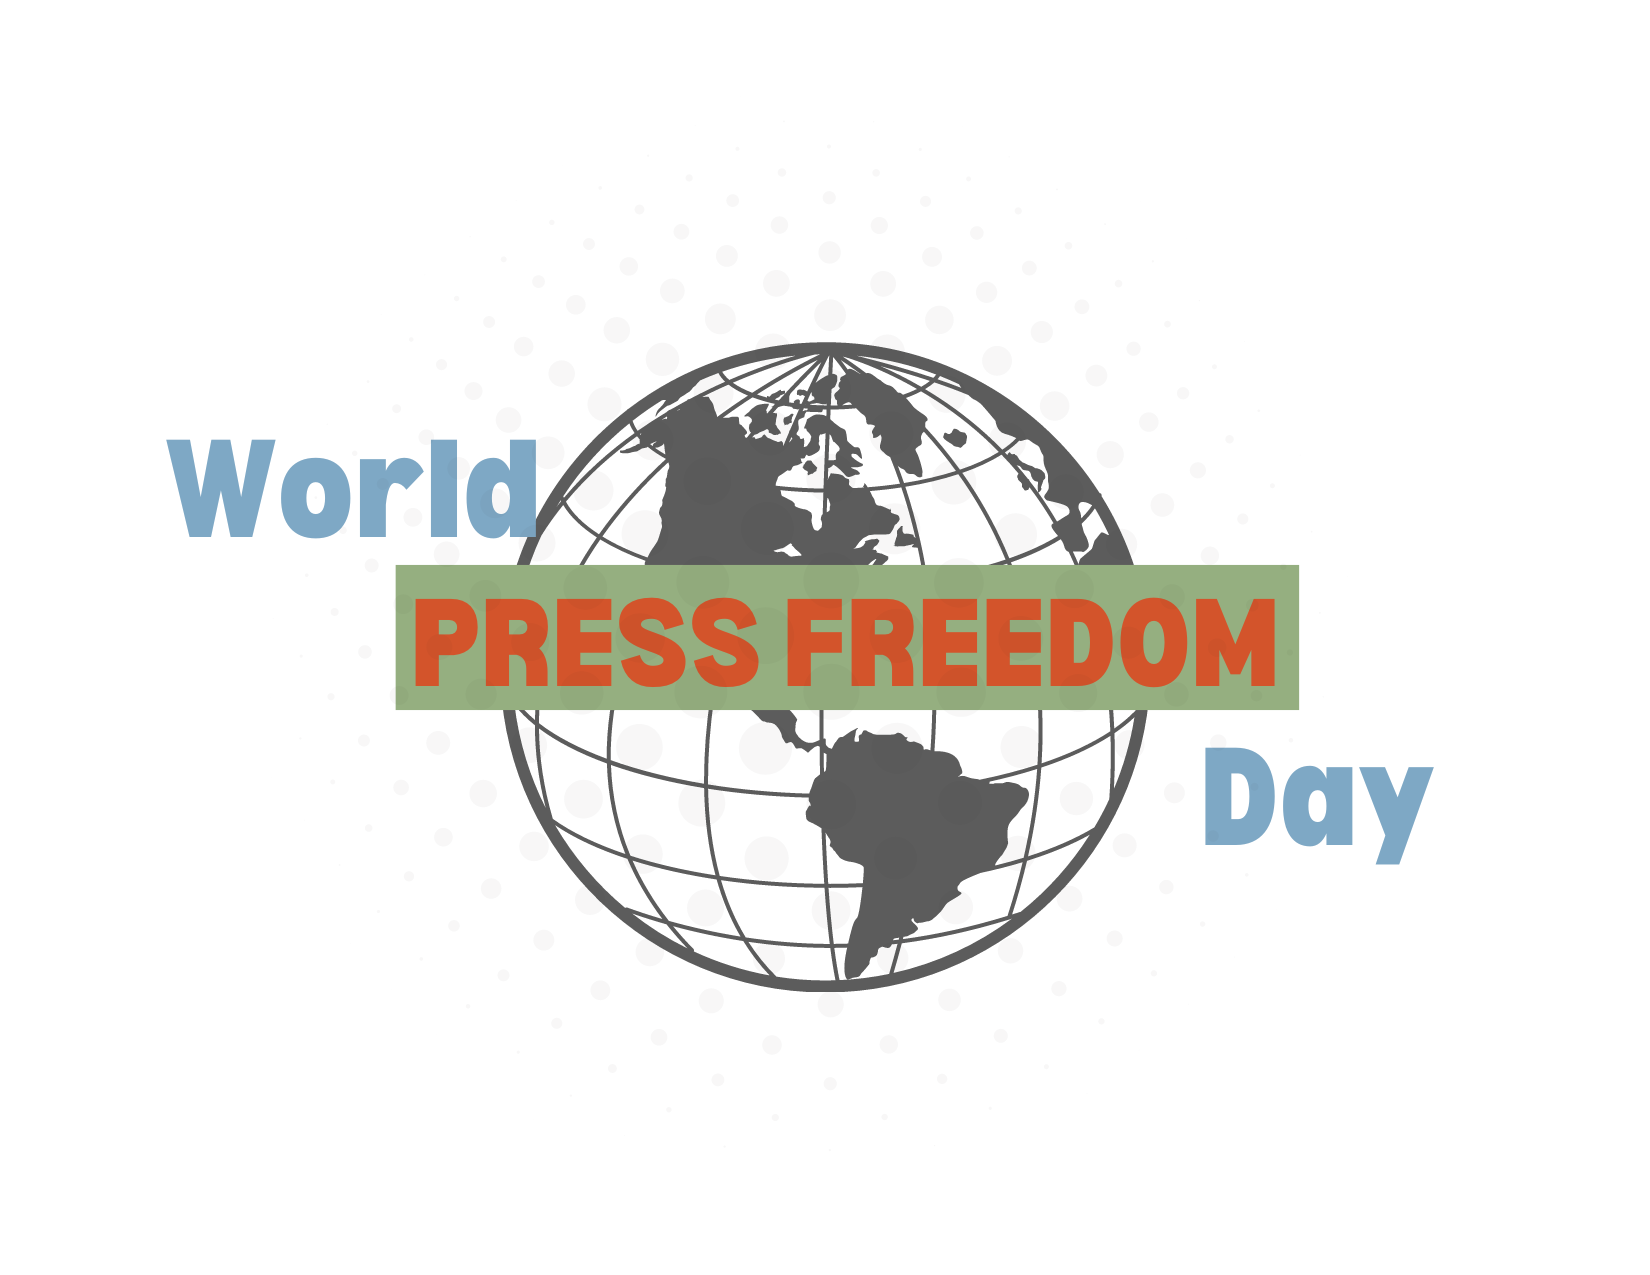 Graphic of globe with World Press Freedom Day written on it